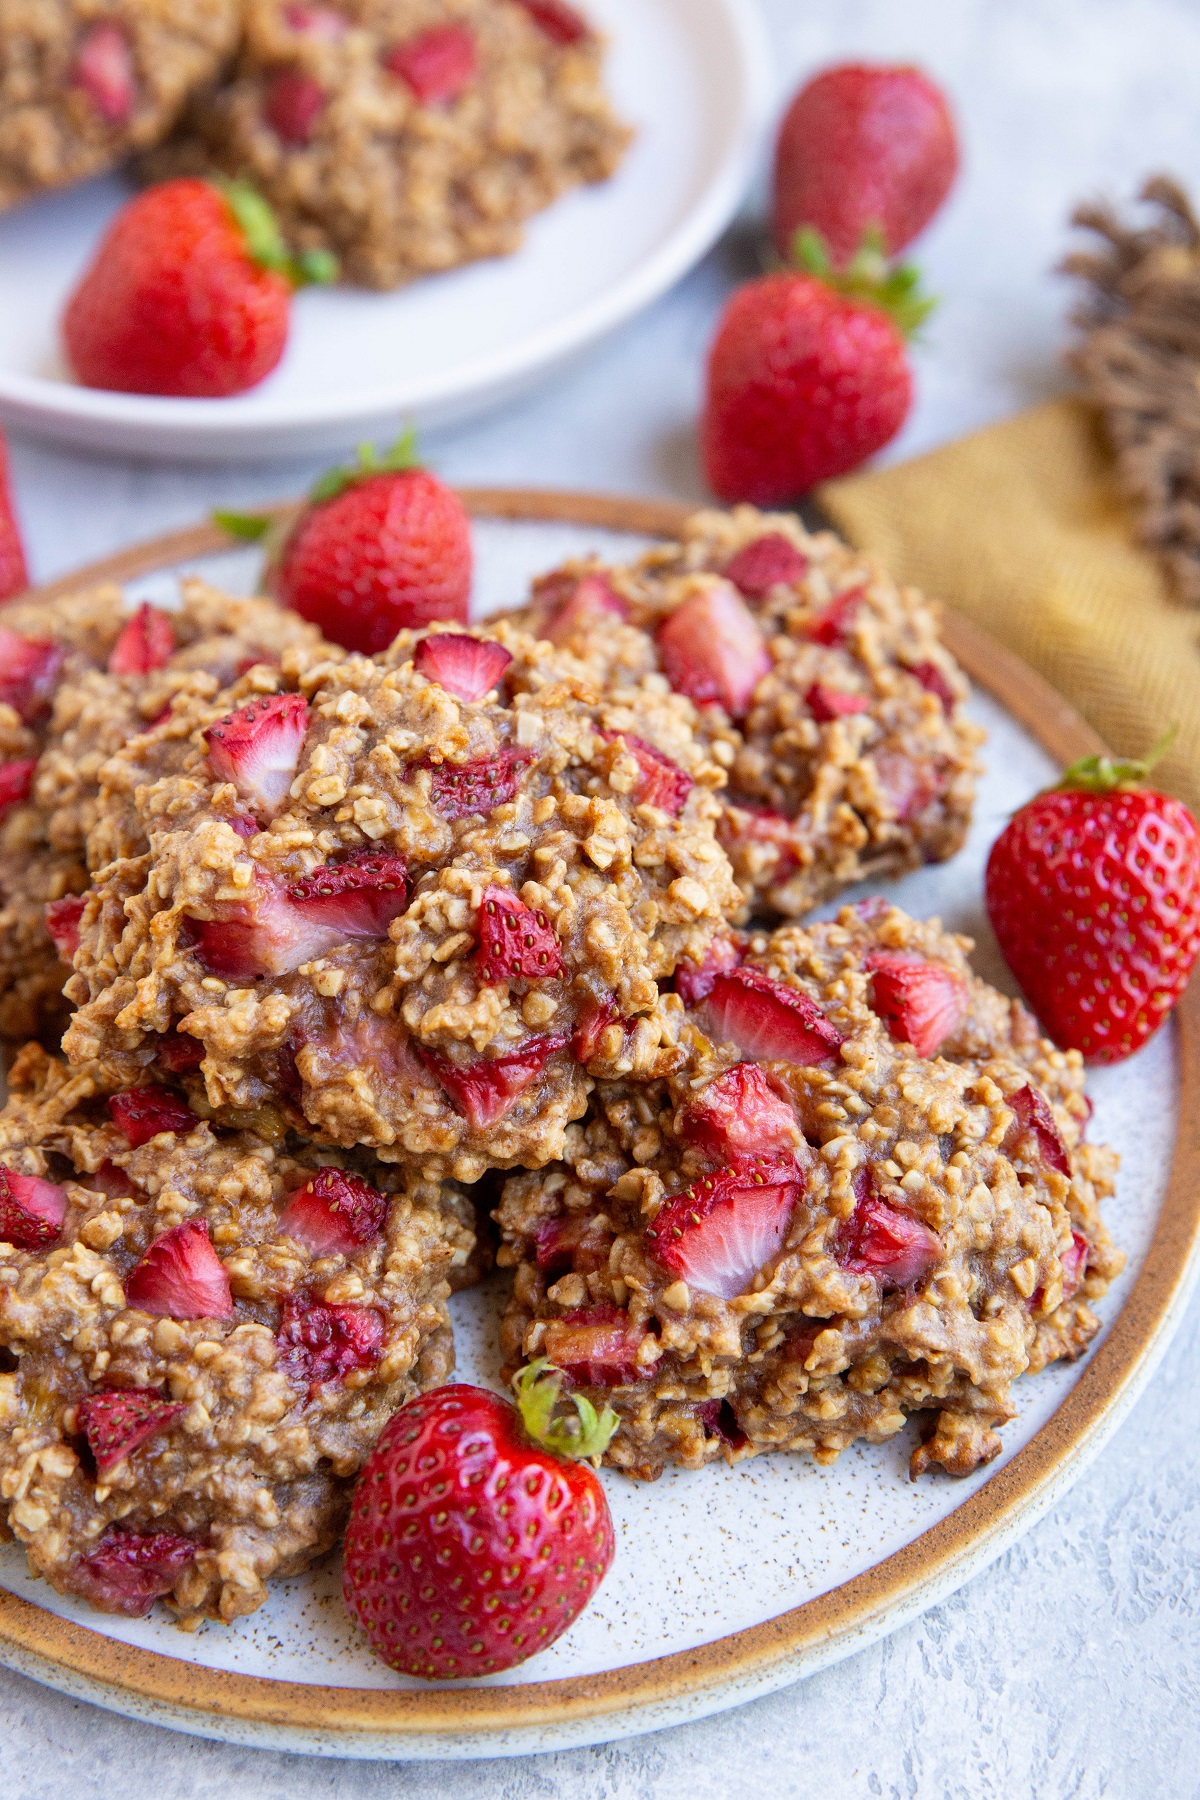 Plate of strawberry oatmeal cookies with a napkin and fresh strawberries all around.